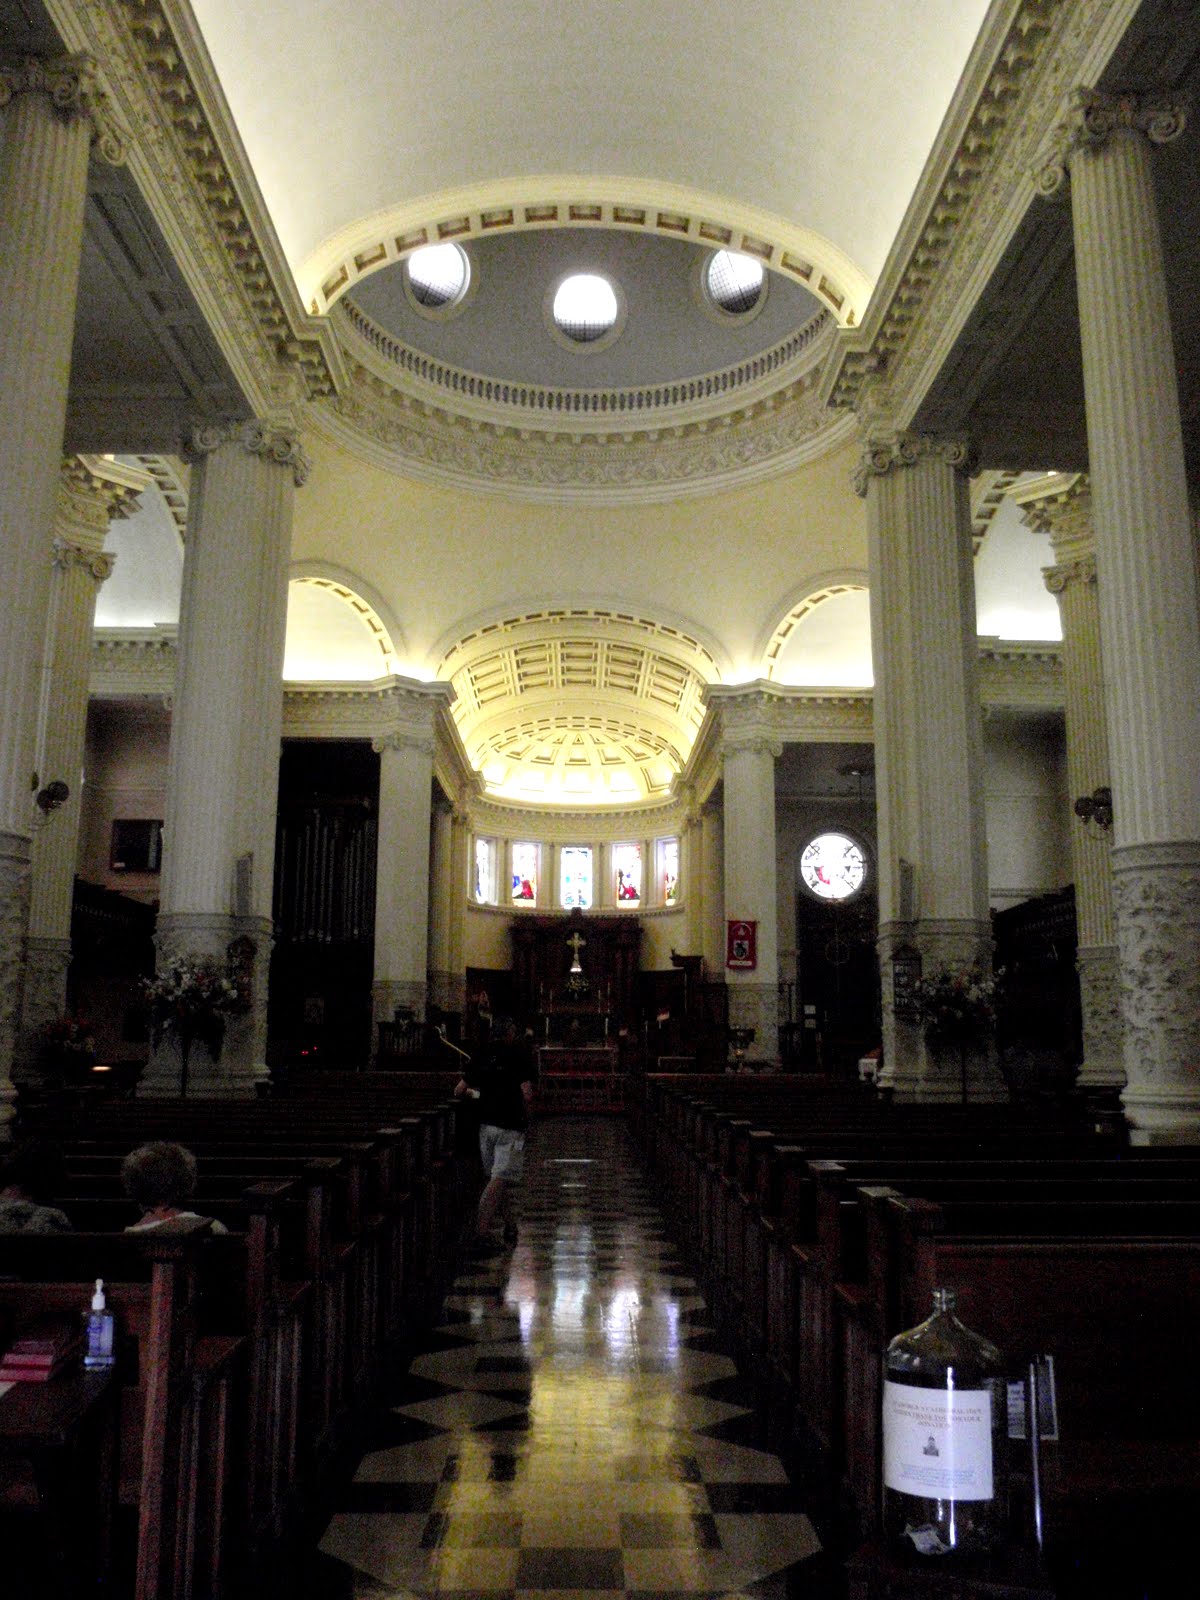 Inside the cathedral